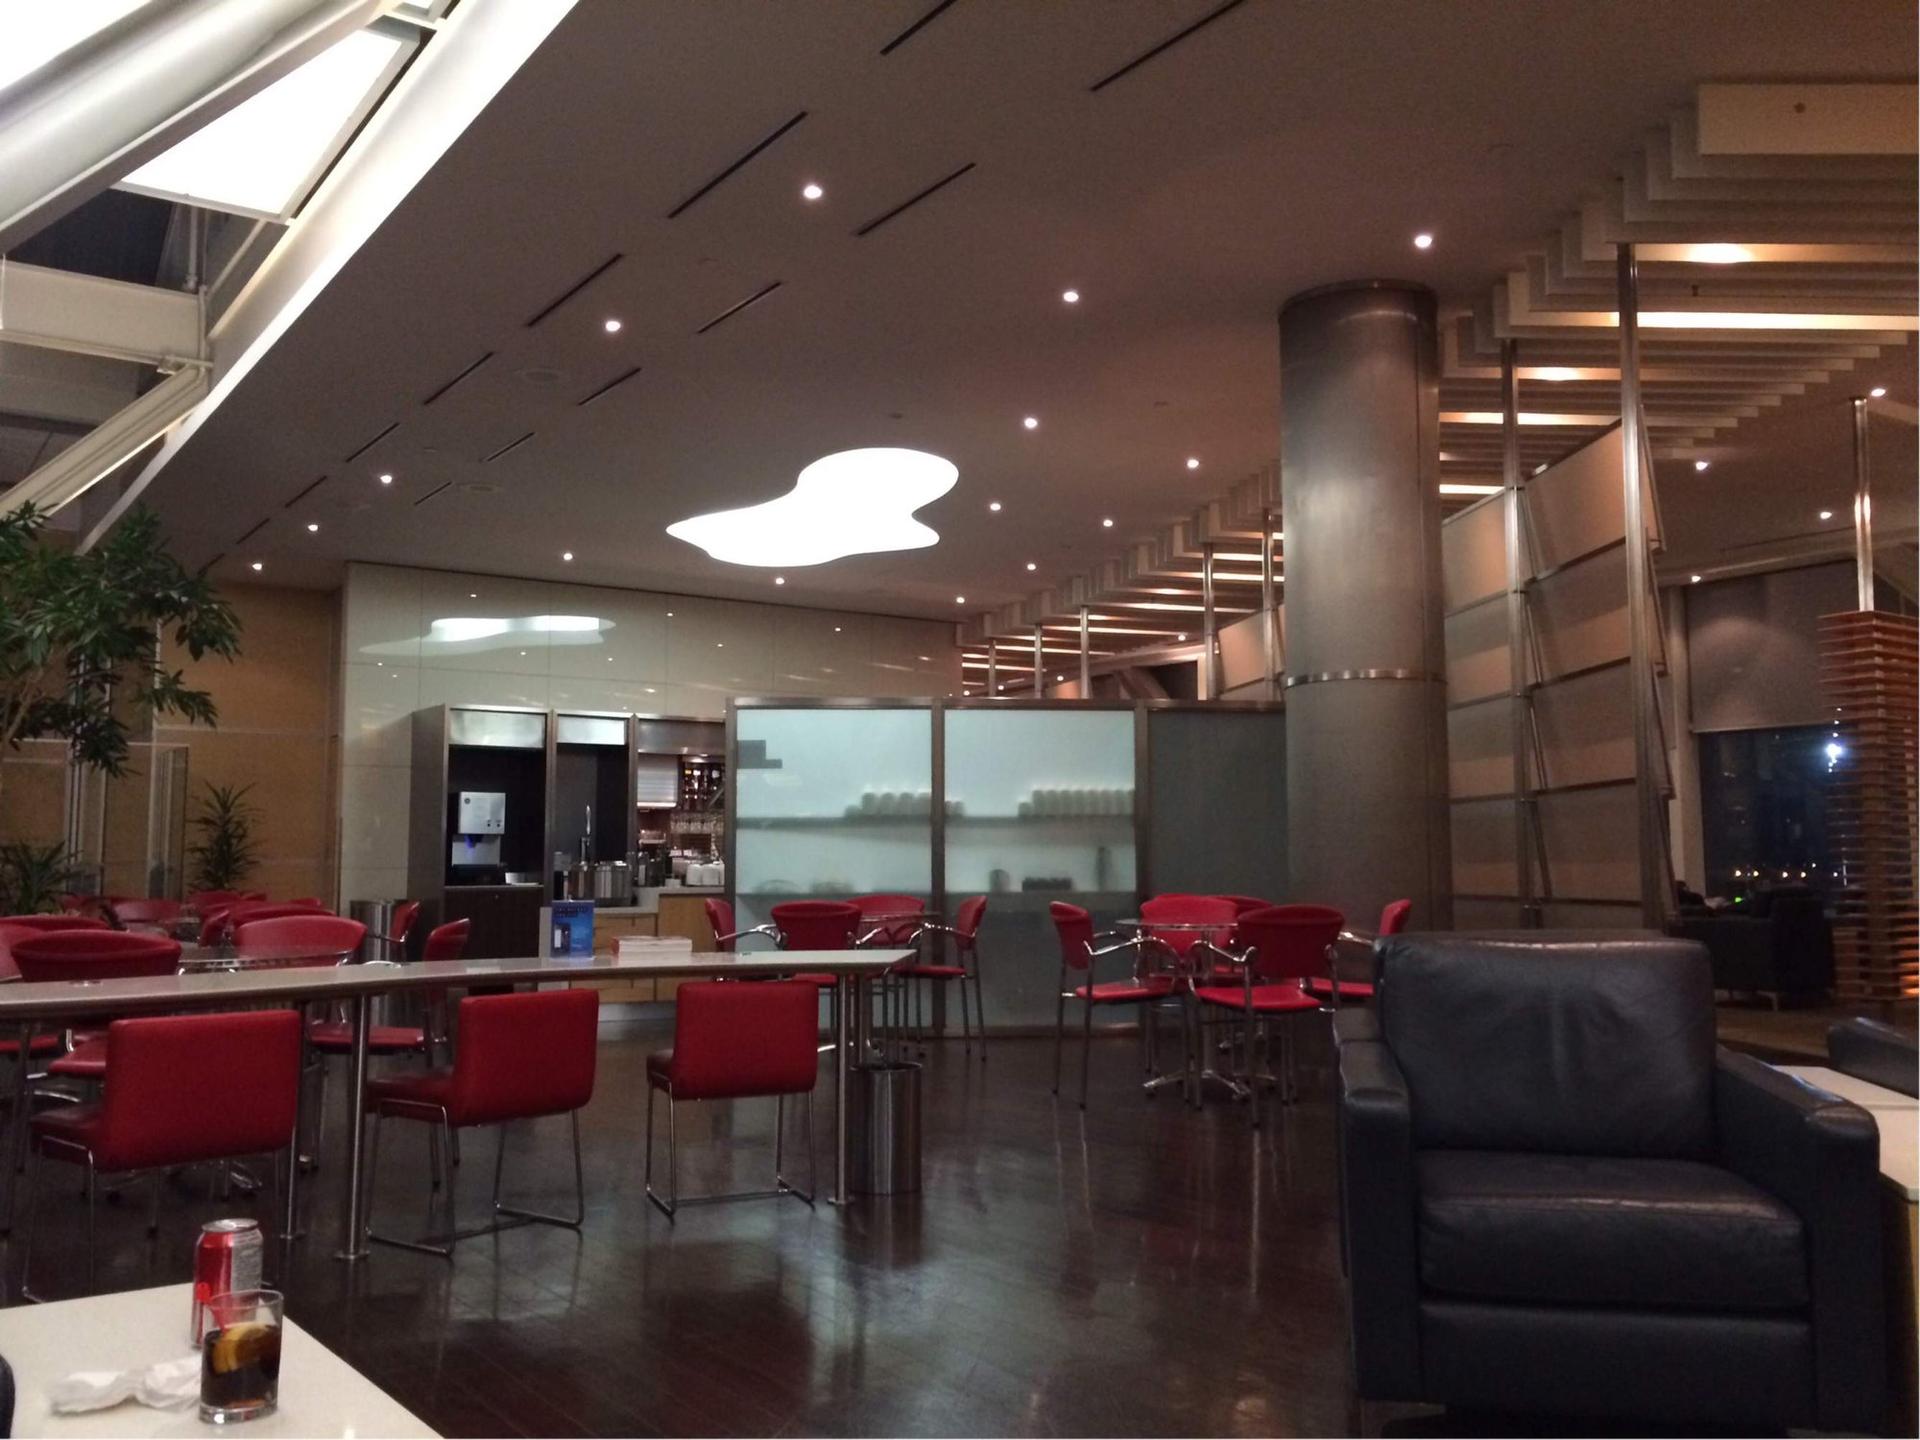 Air Canada Maple Leaf Lounge image 12 of 17